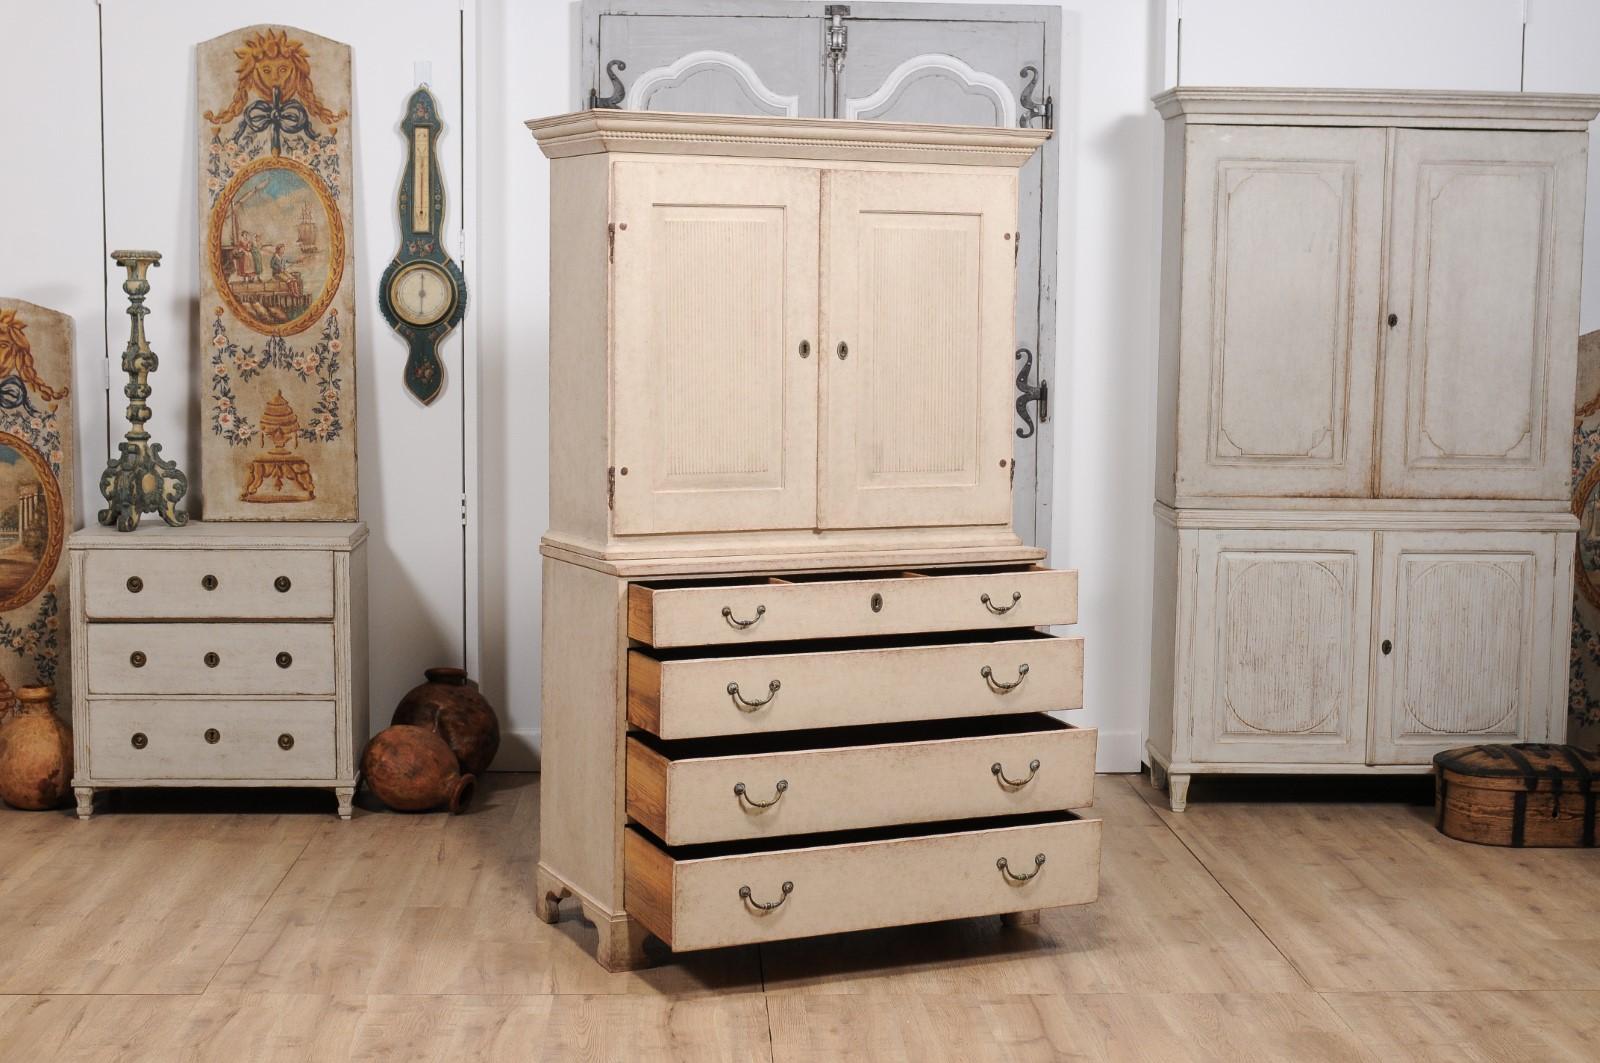 1834 Swedish Two-part Painted Cabinet with Doors and Graduated Drawers In Good Condition For Sale In Atlanta, GA